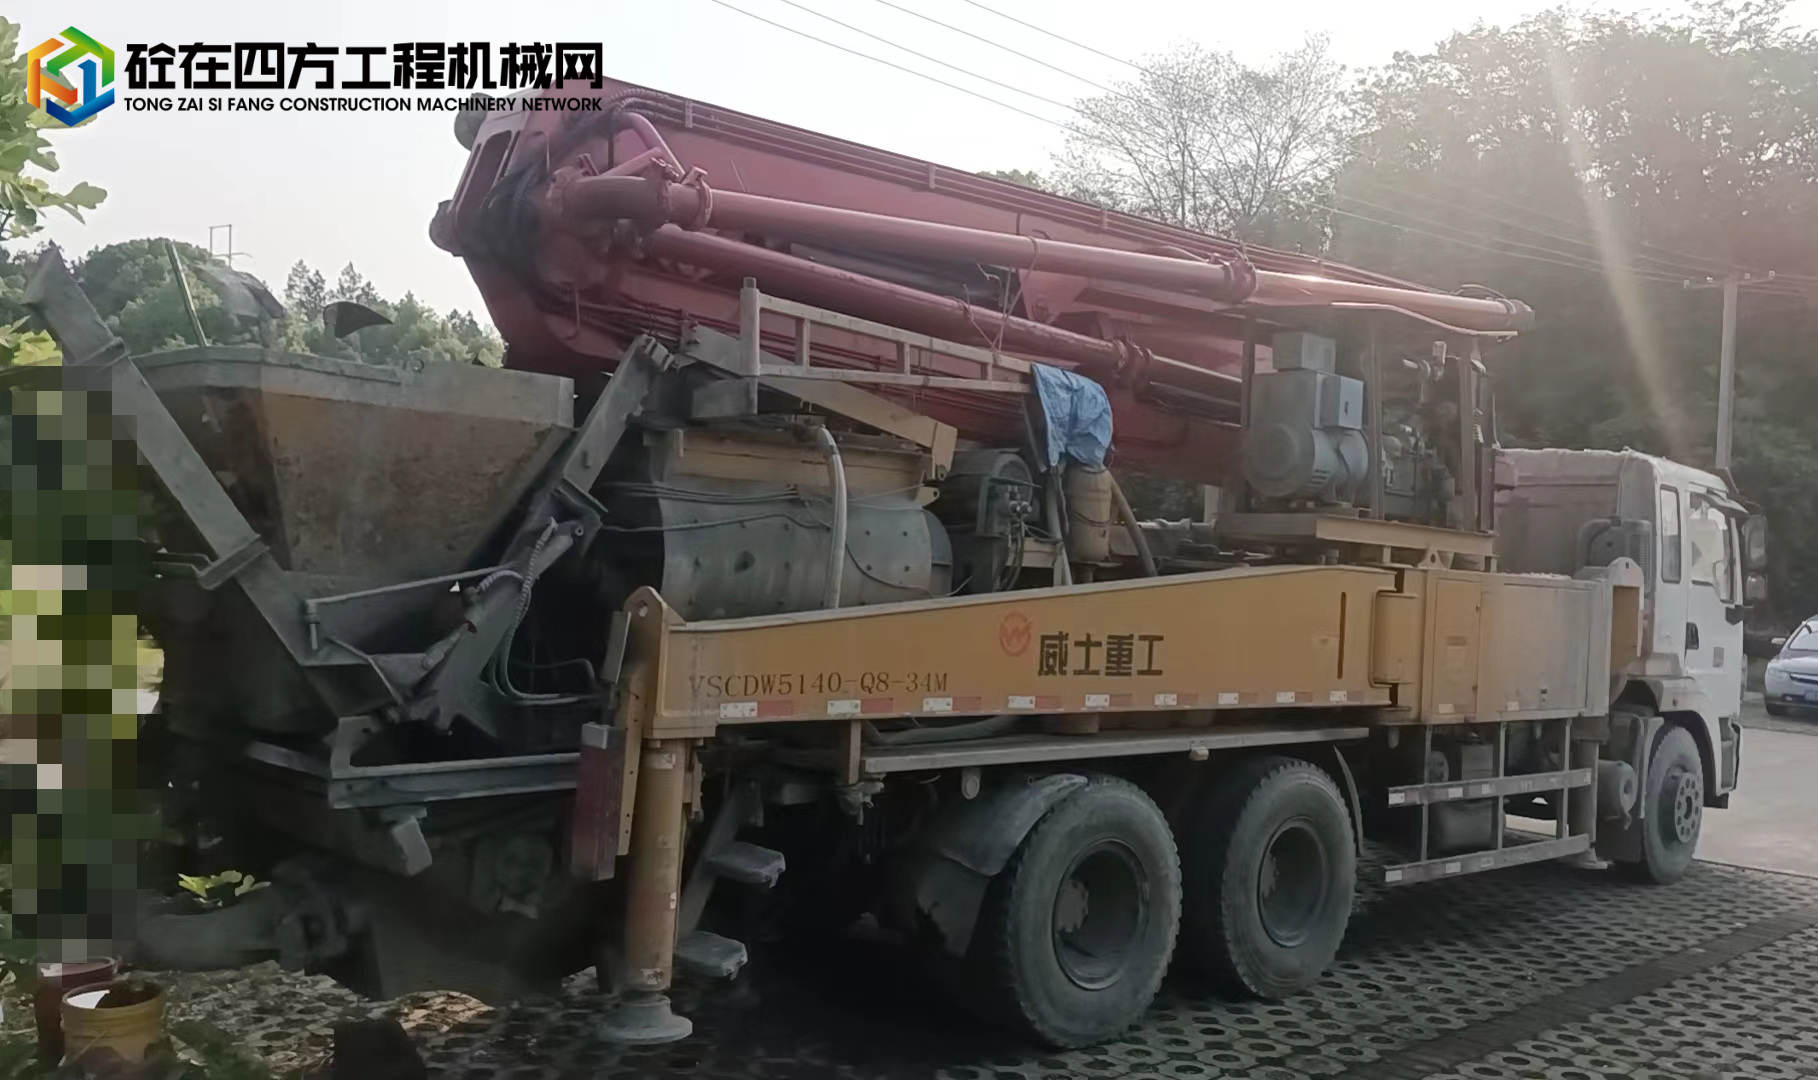 https://images.tongzsf.com/tong/truck_machine/20240408/16613f0bbca5af.jpg